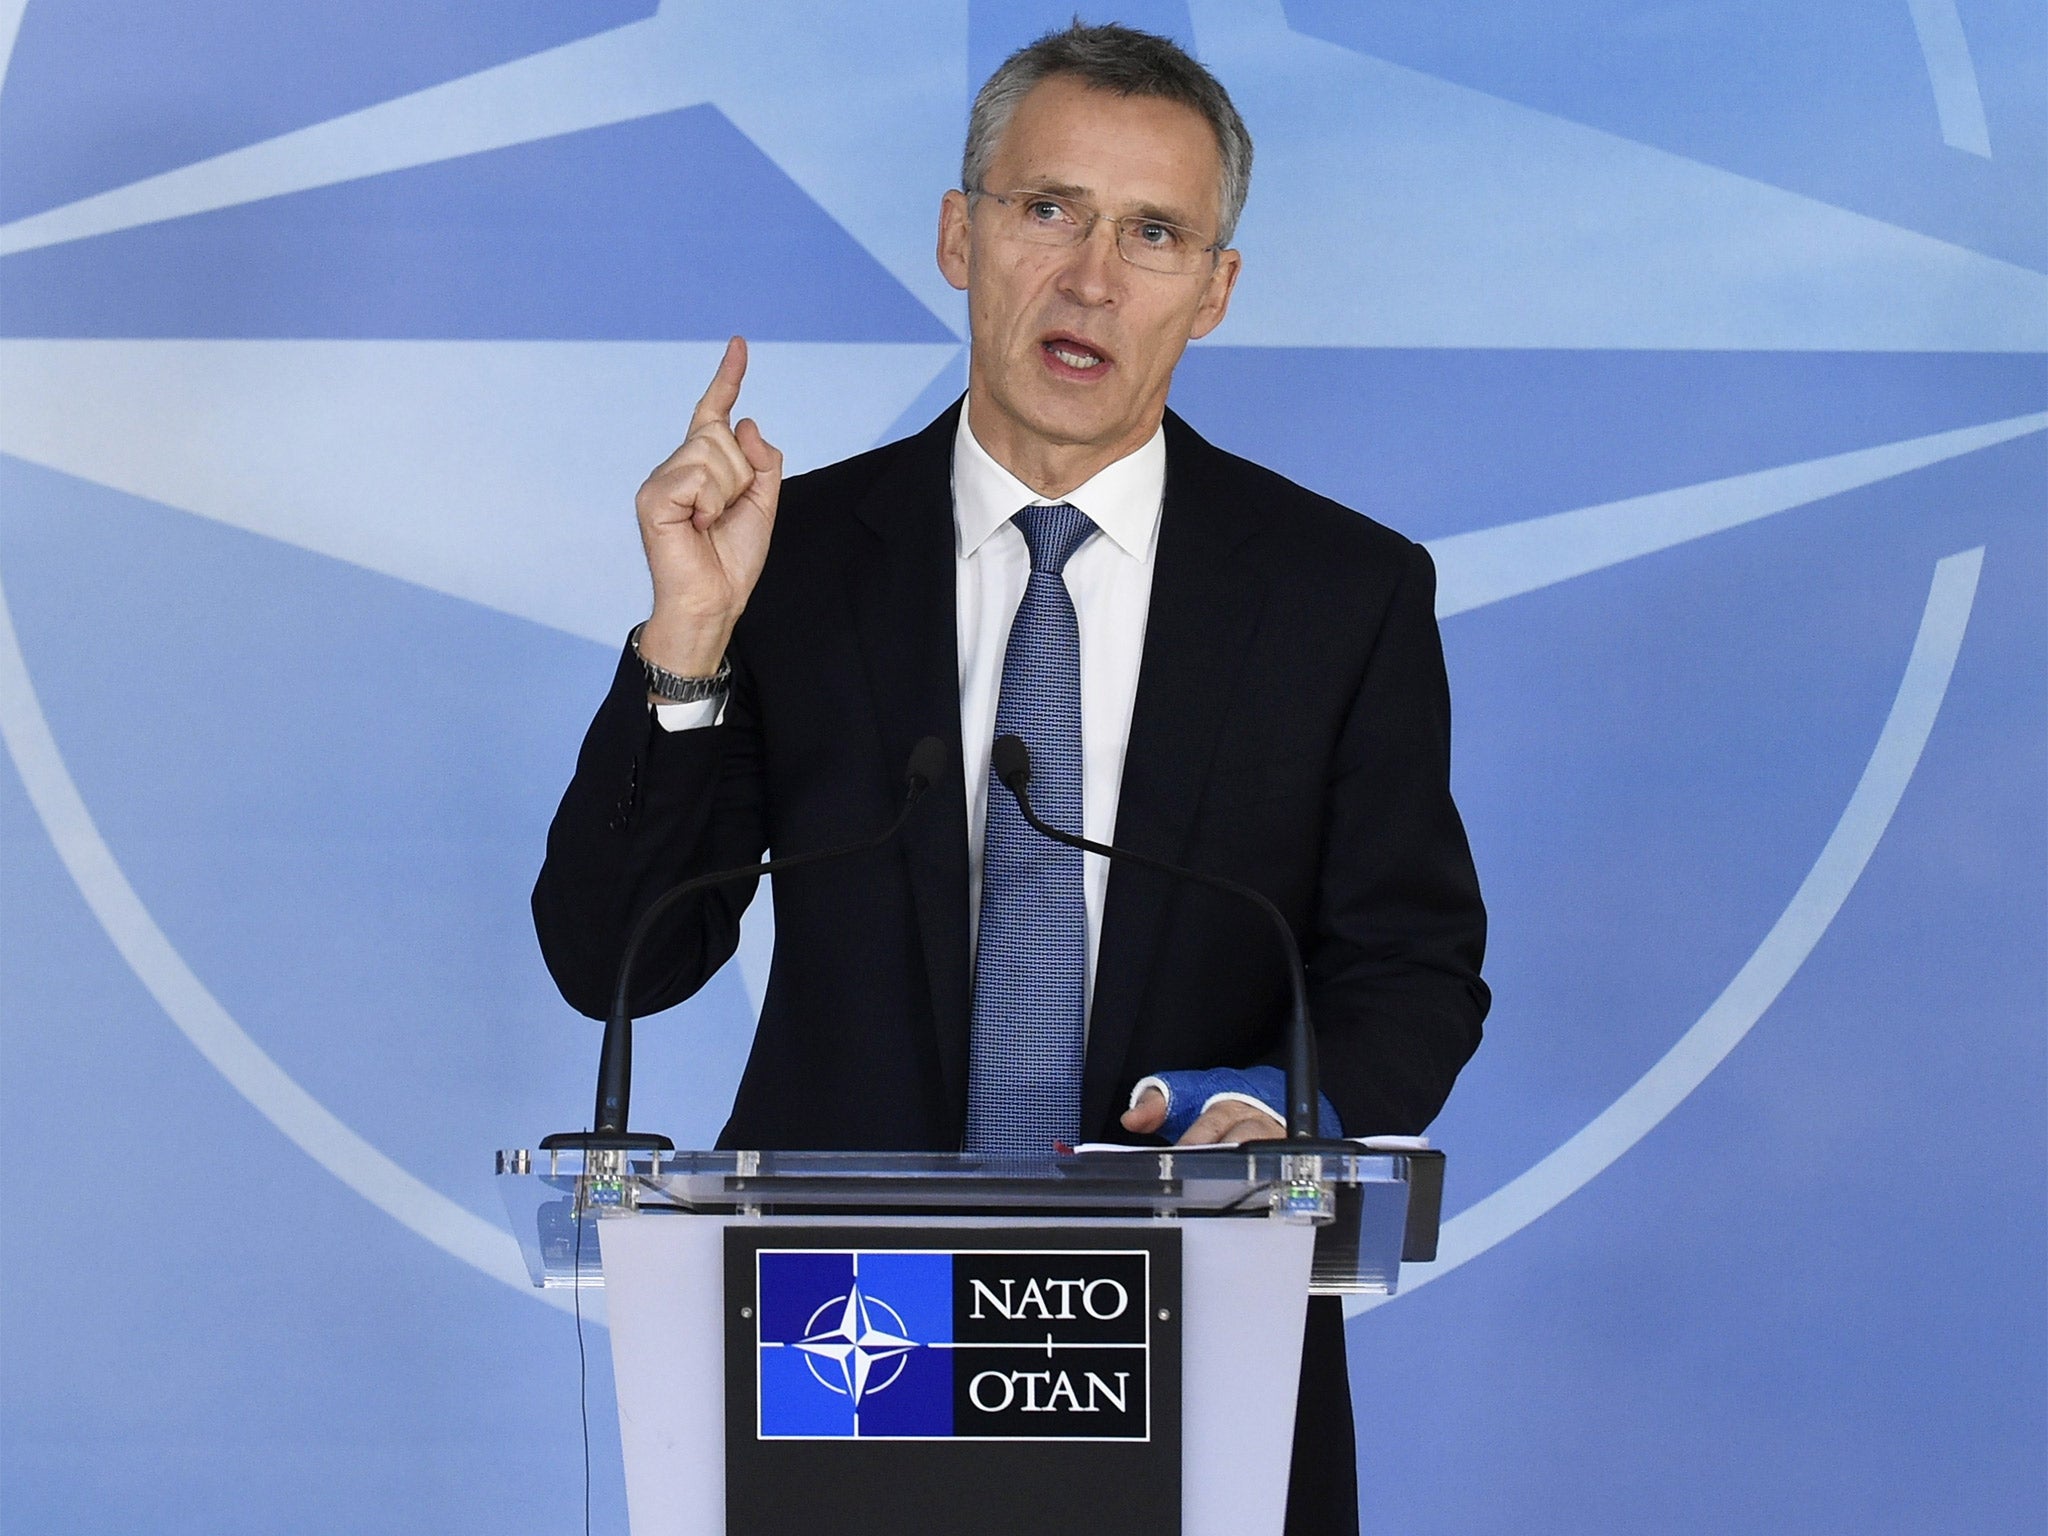 Jens Stoltenberg, Secretary-General of Nato, urged Russia and Turkey to co-operate to calm tensions